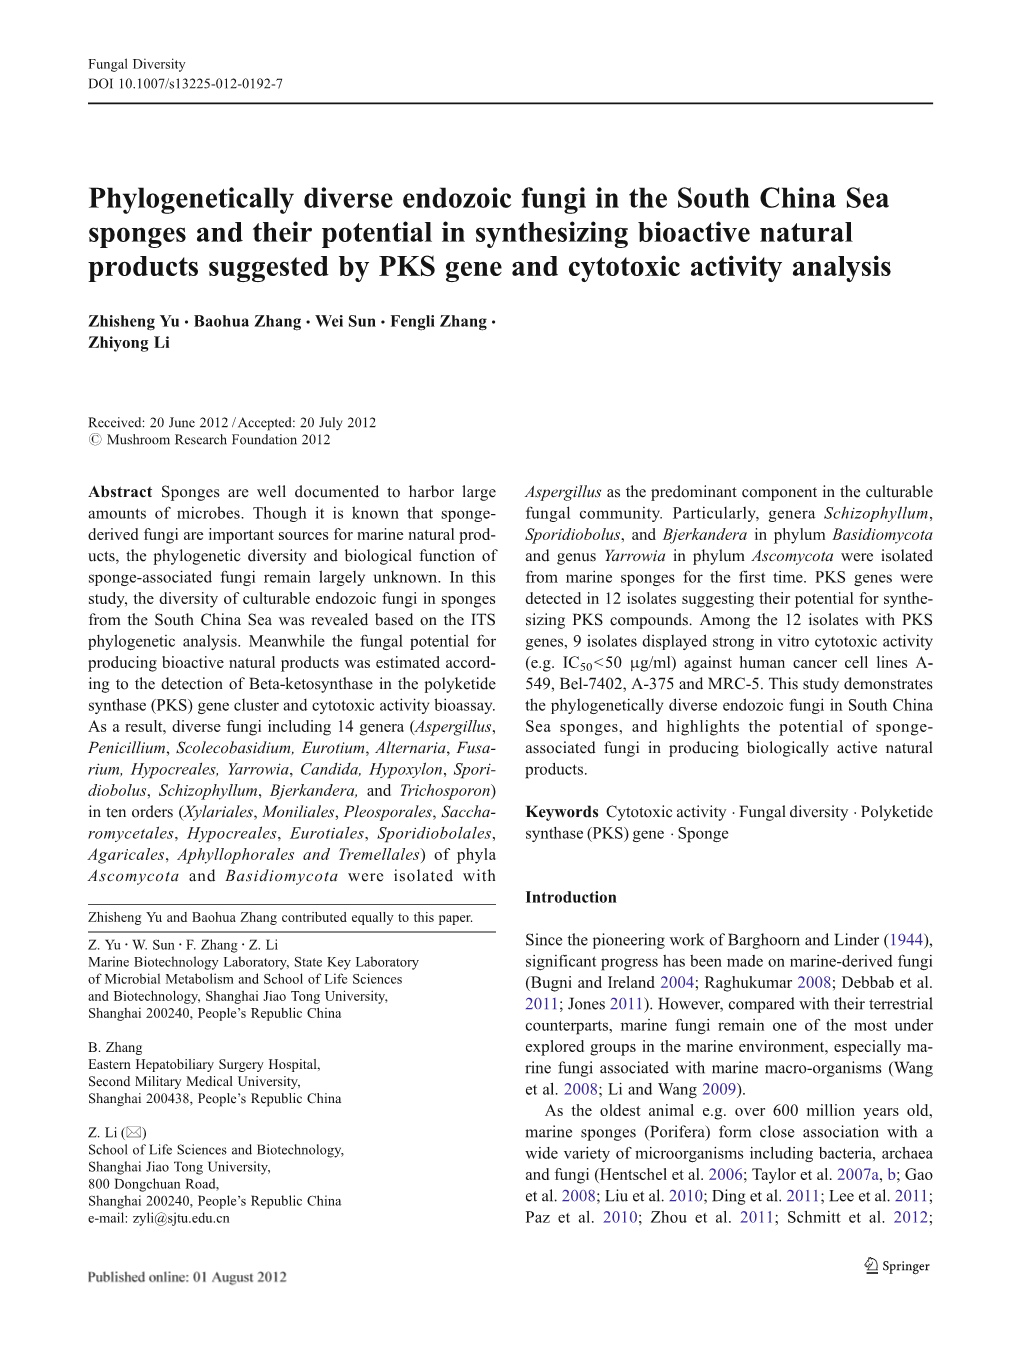 Phylogenetically Diverse Endozoic Fungi in the South China Sea